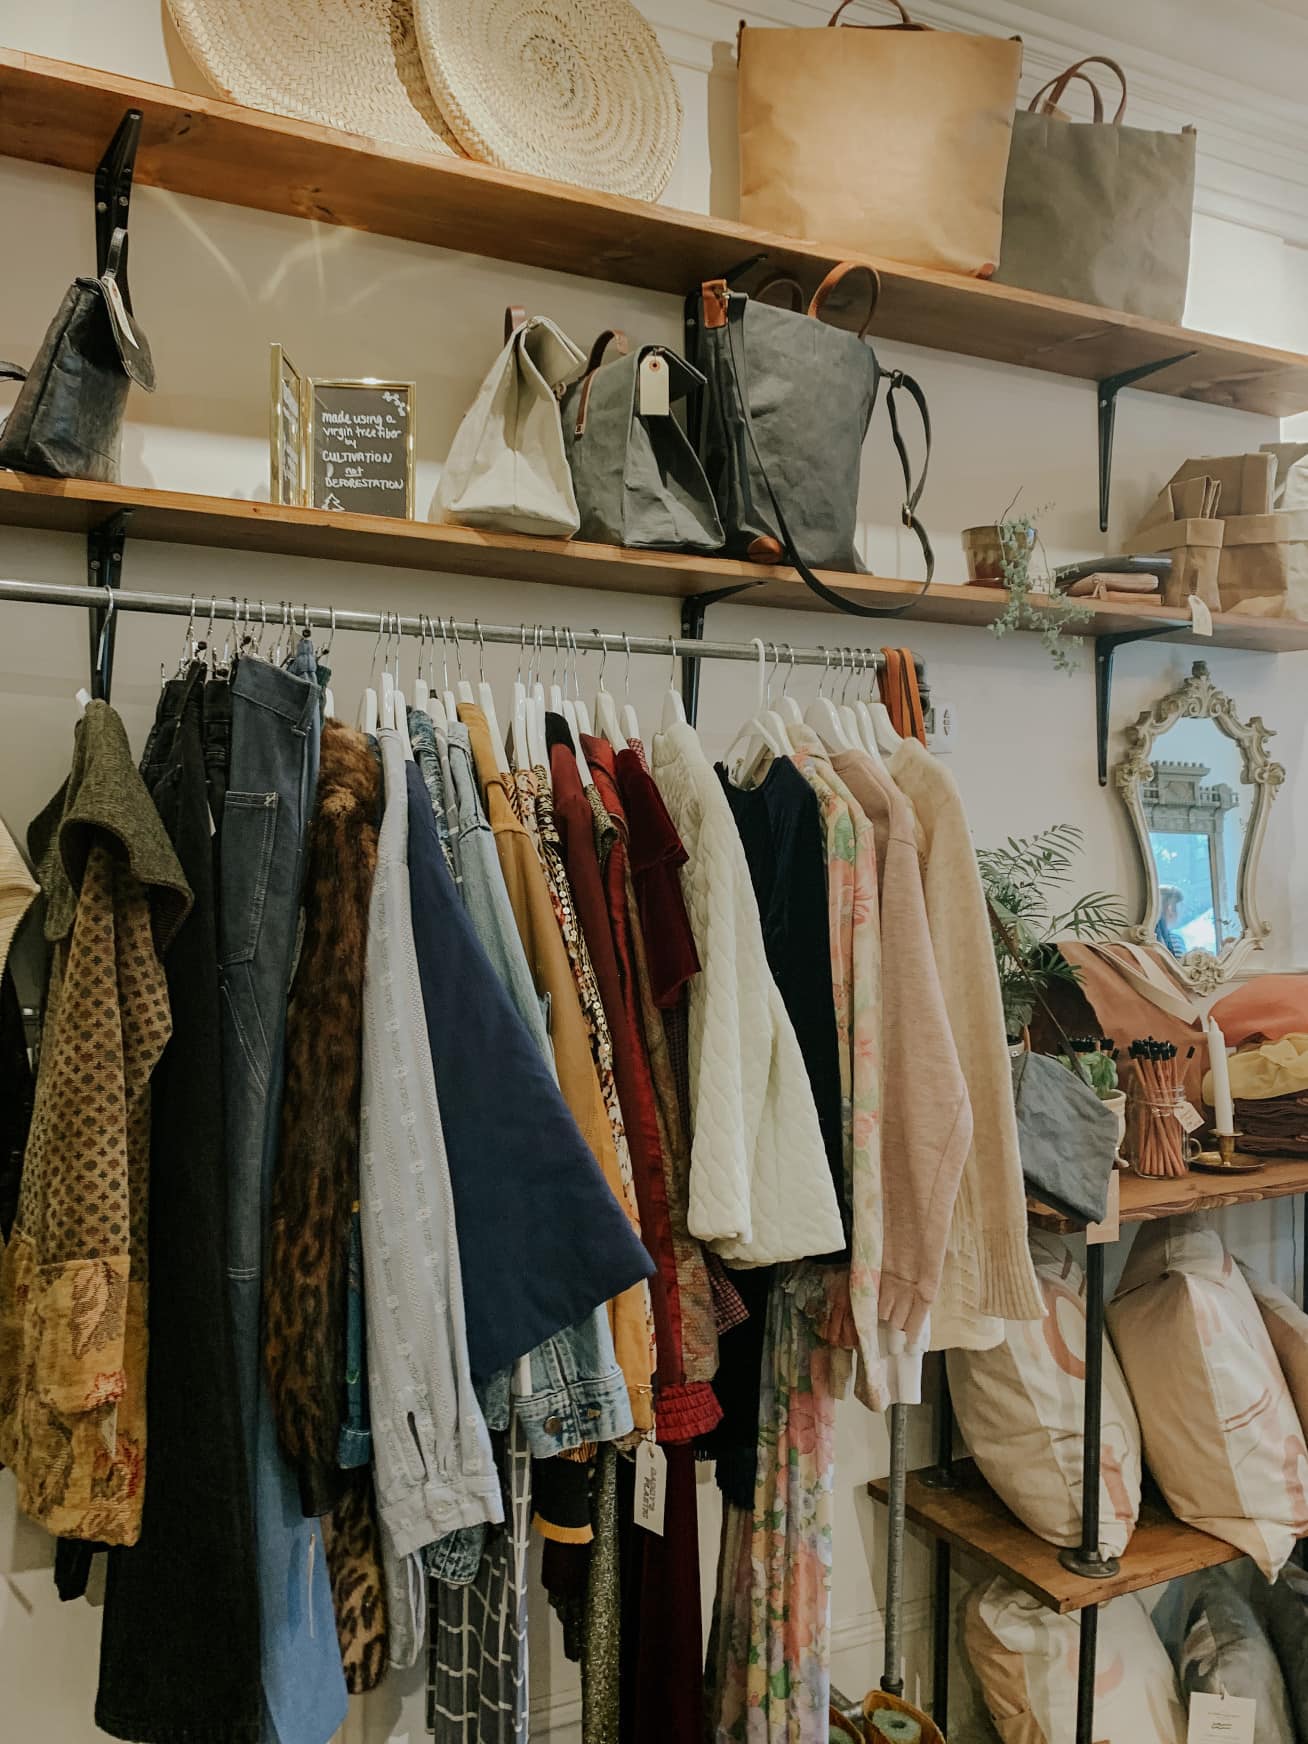 15 Tips to Get the Best Clothing Haul at Thrift Stores - Mindful